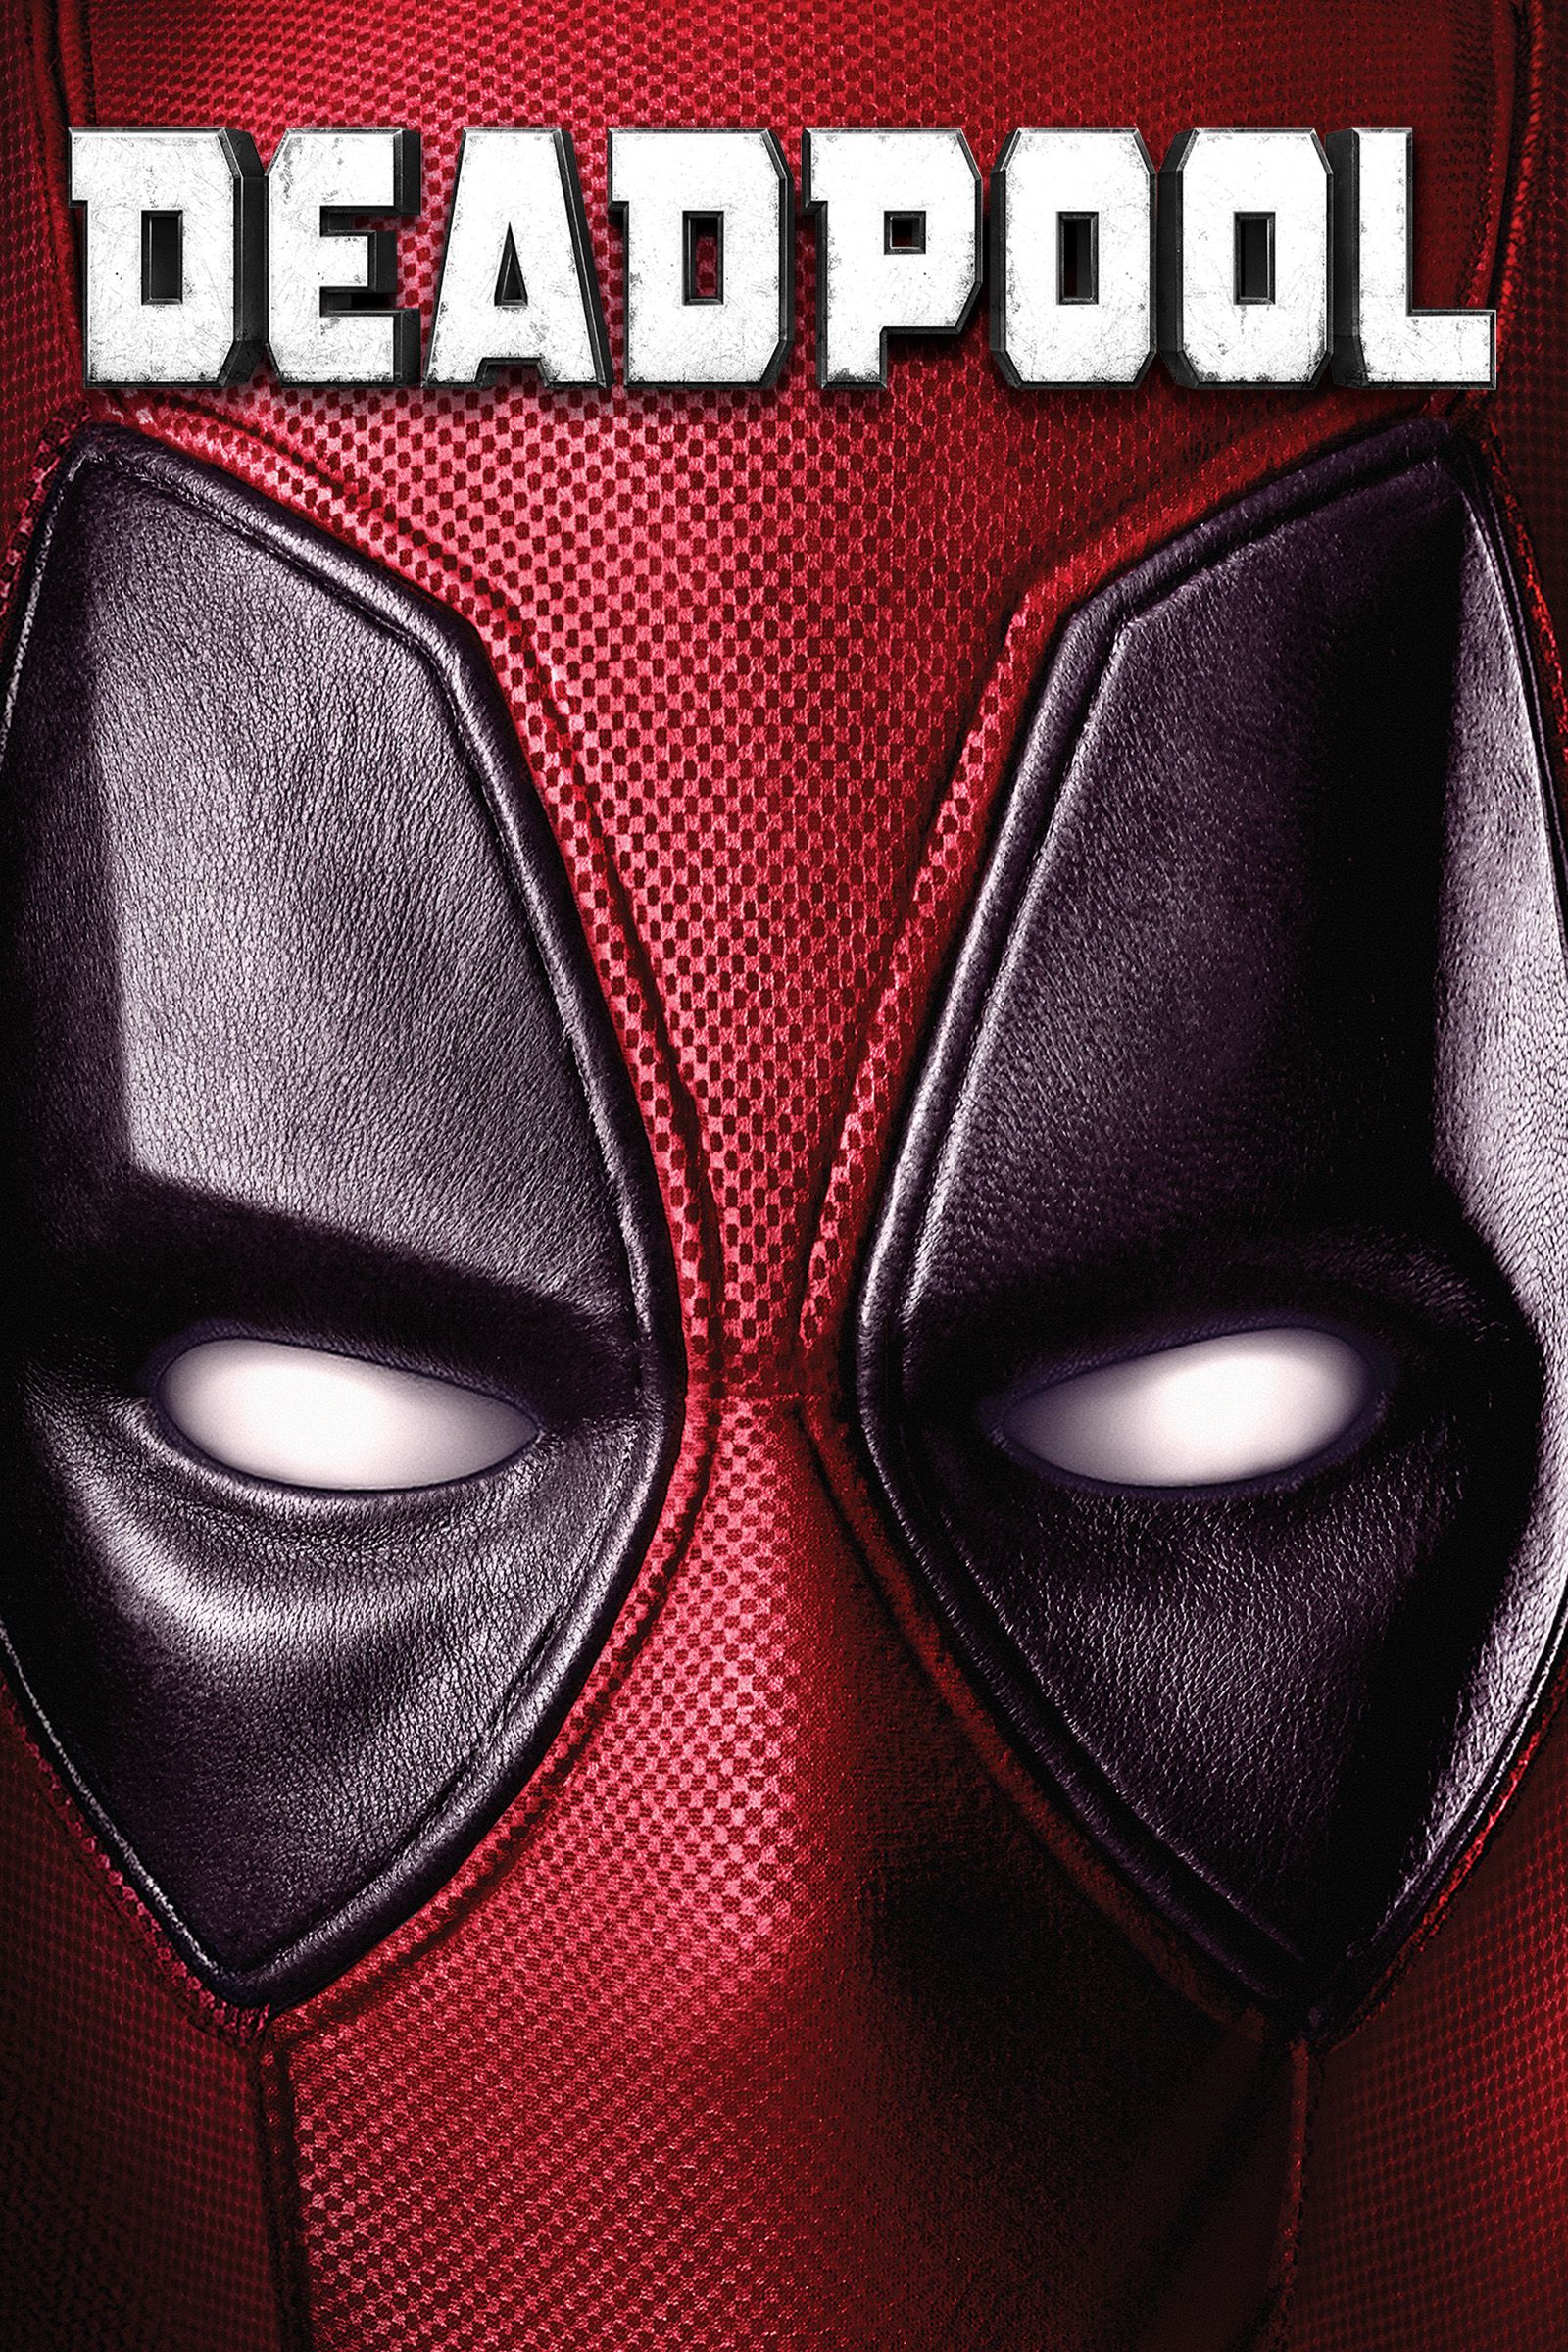 once-upon-a-deadpool-full-movie-online-free-lalapadivine